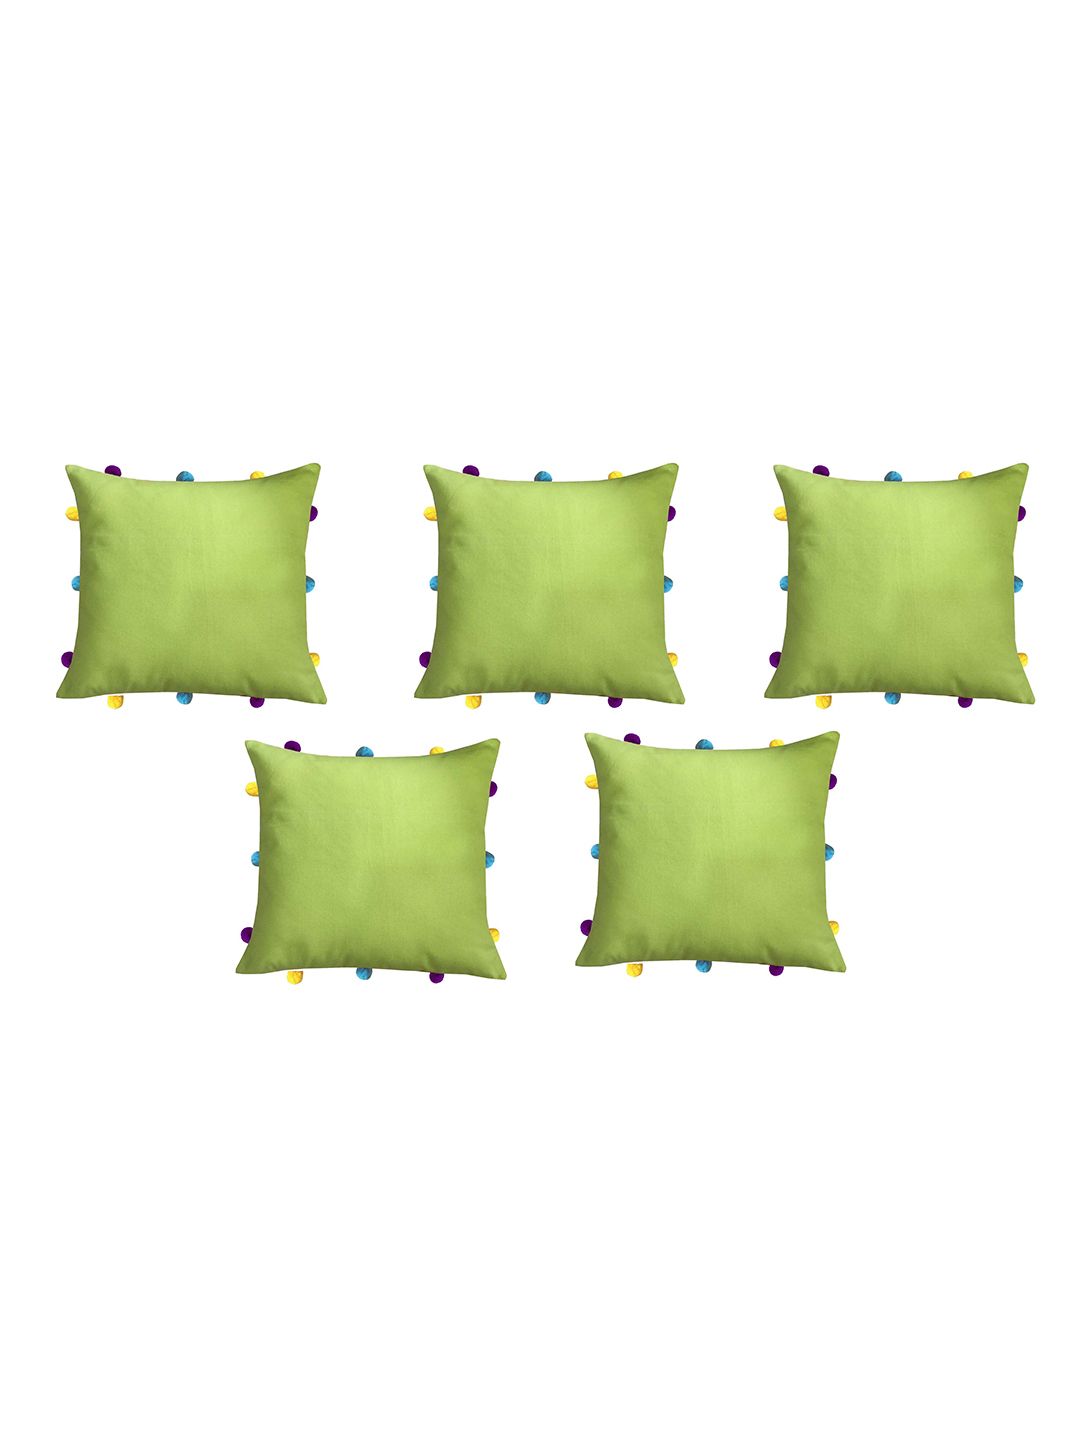 Lushomes Green Set of 5 Square Cushion Covers Price in India